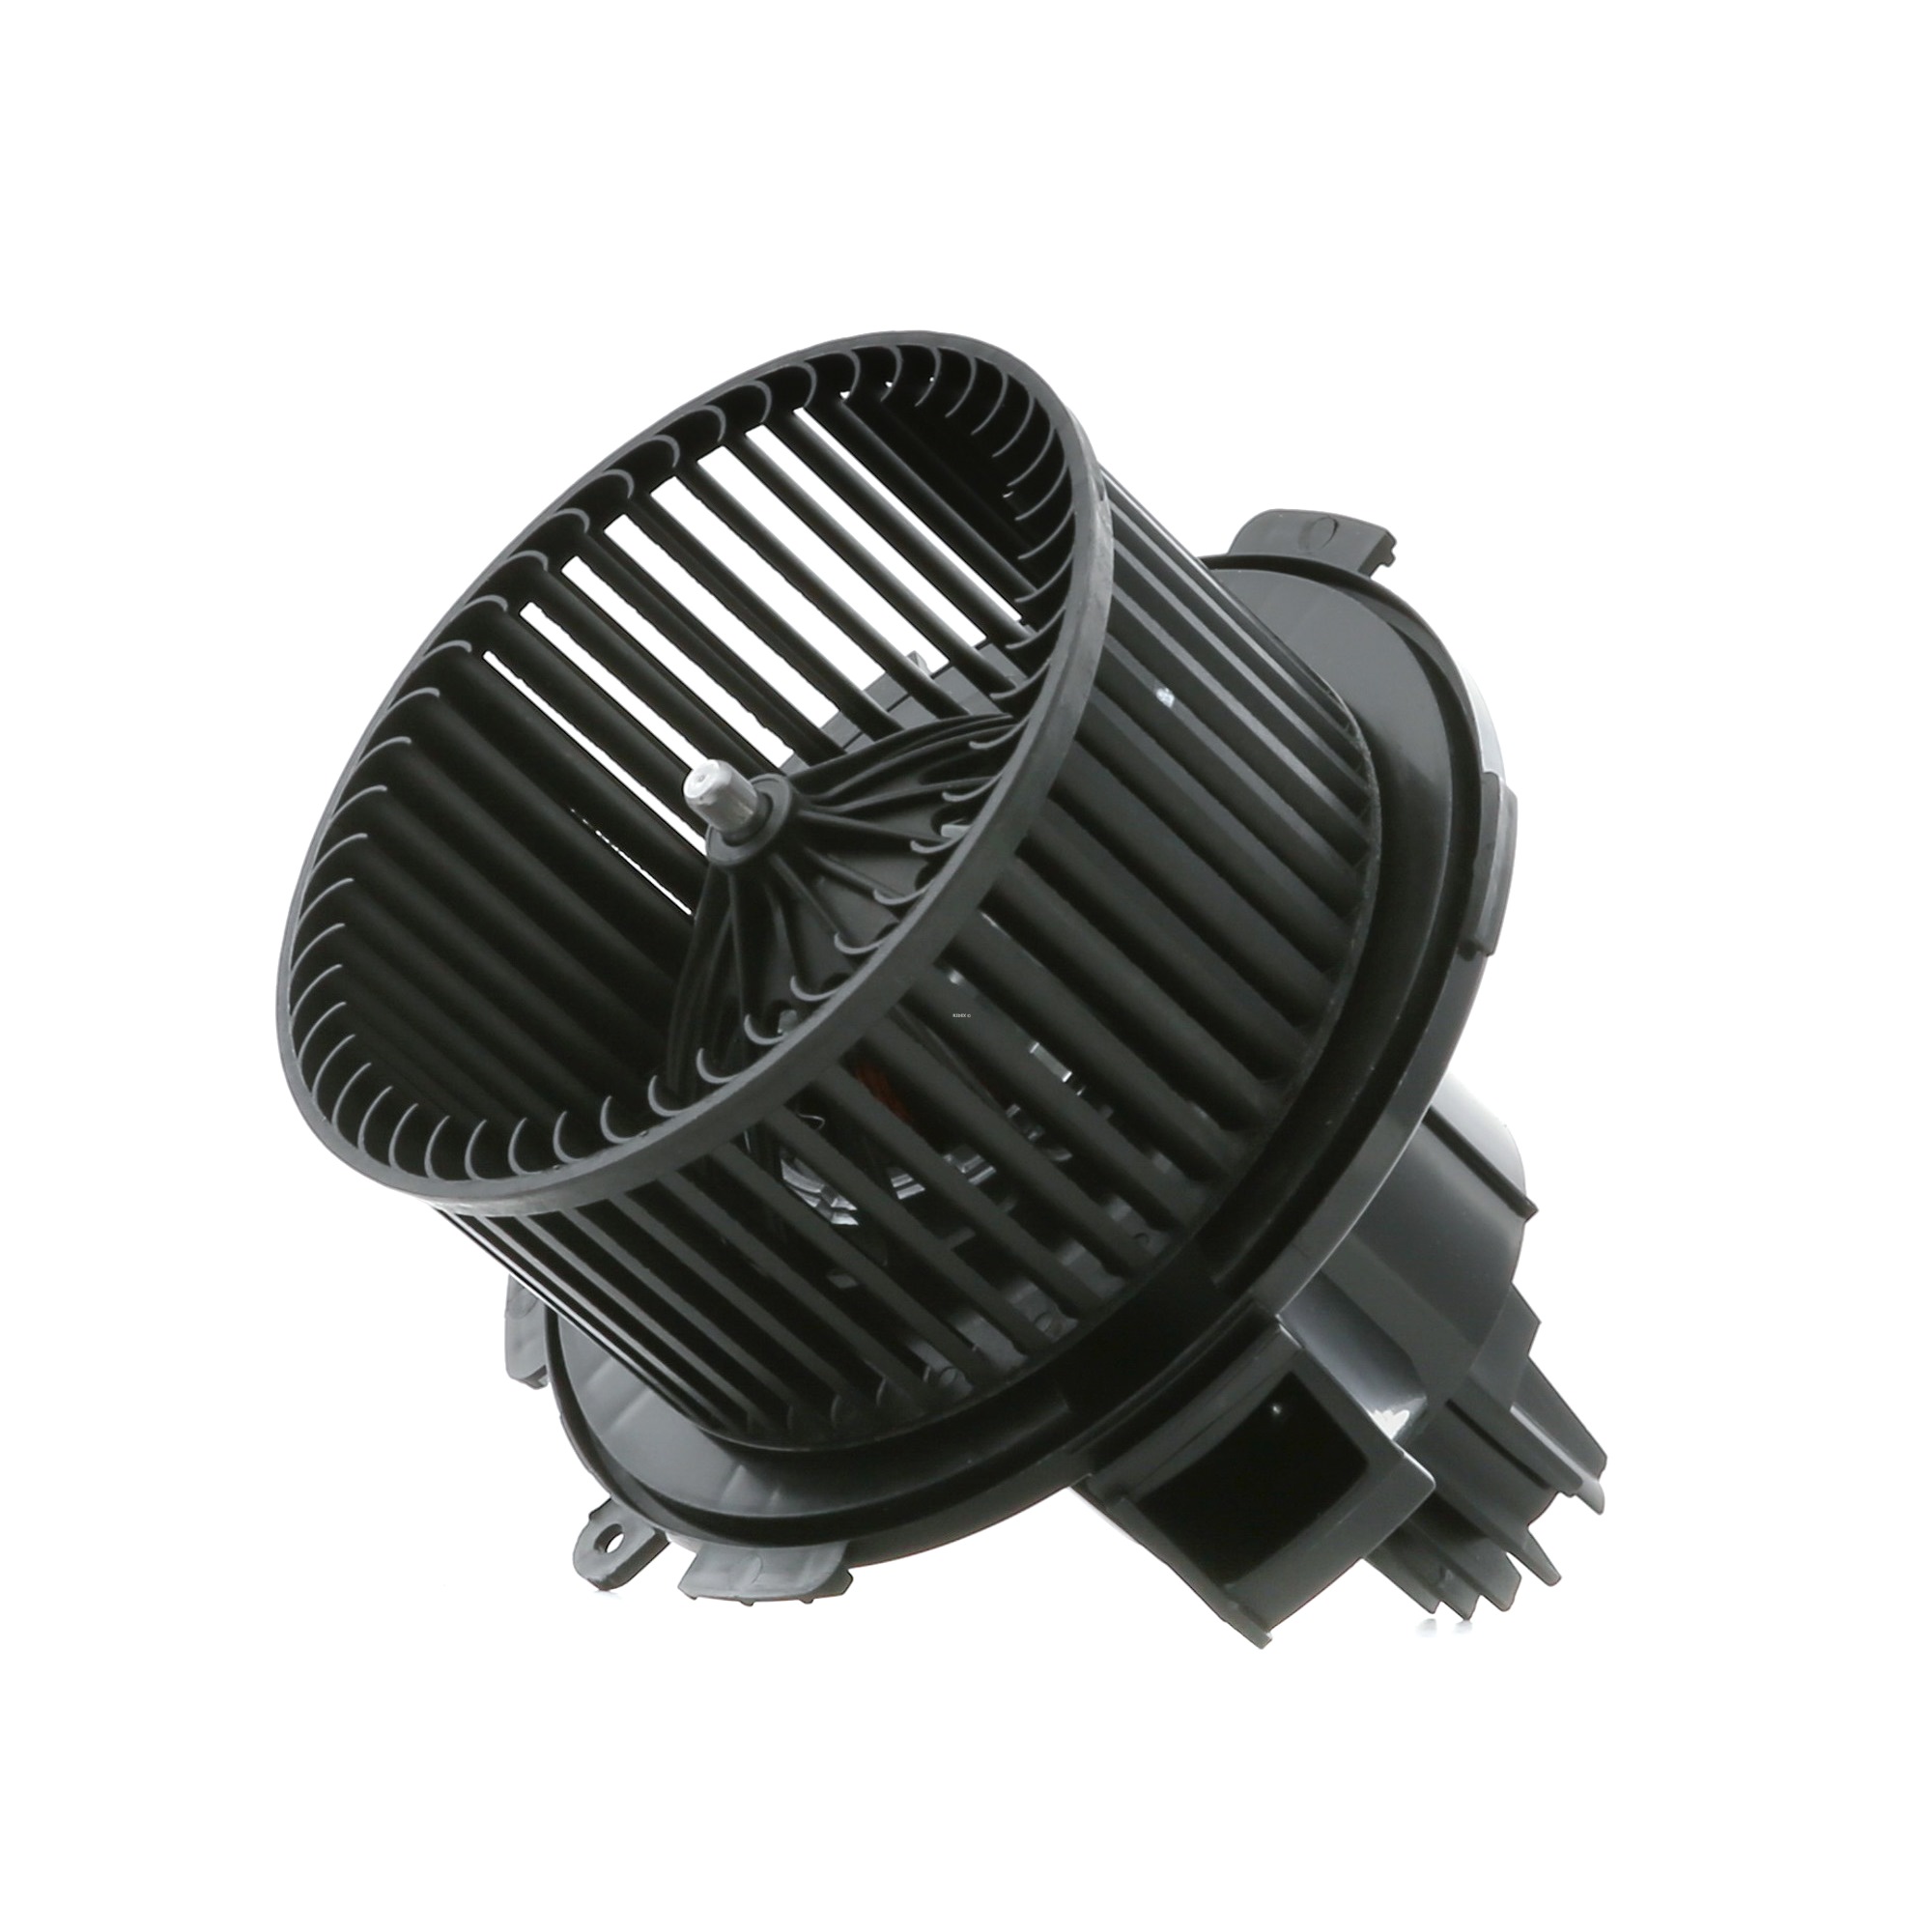 RIDEX 2669I0079 Interior Blower for left-hand drive vehicles, without radiator fan shroud